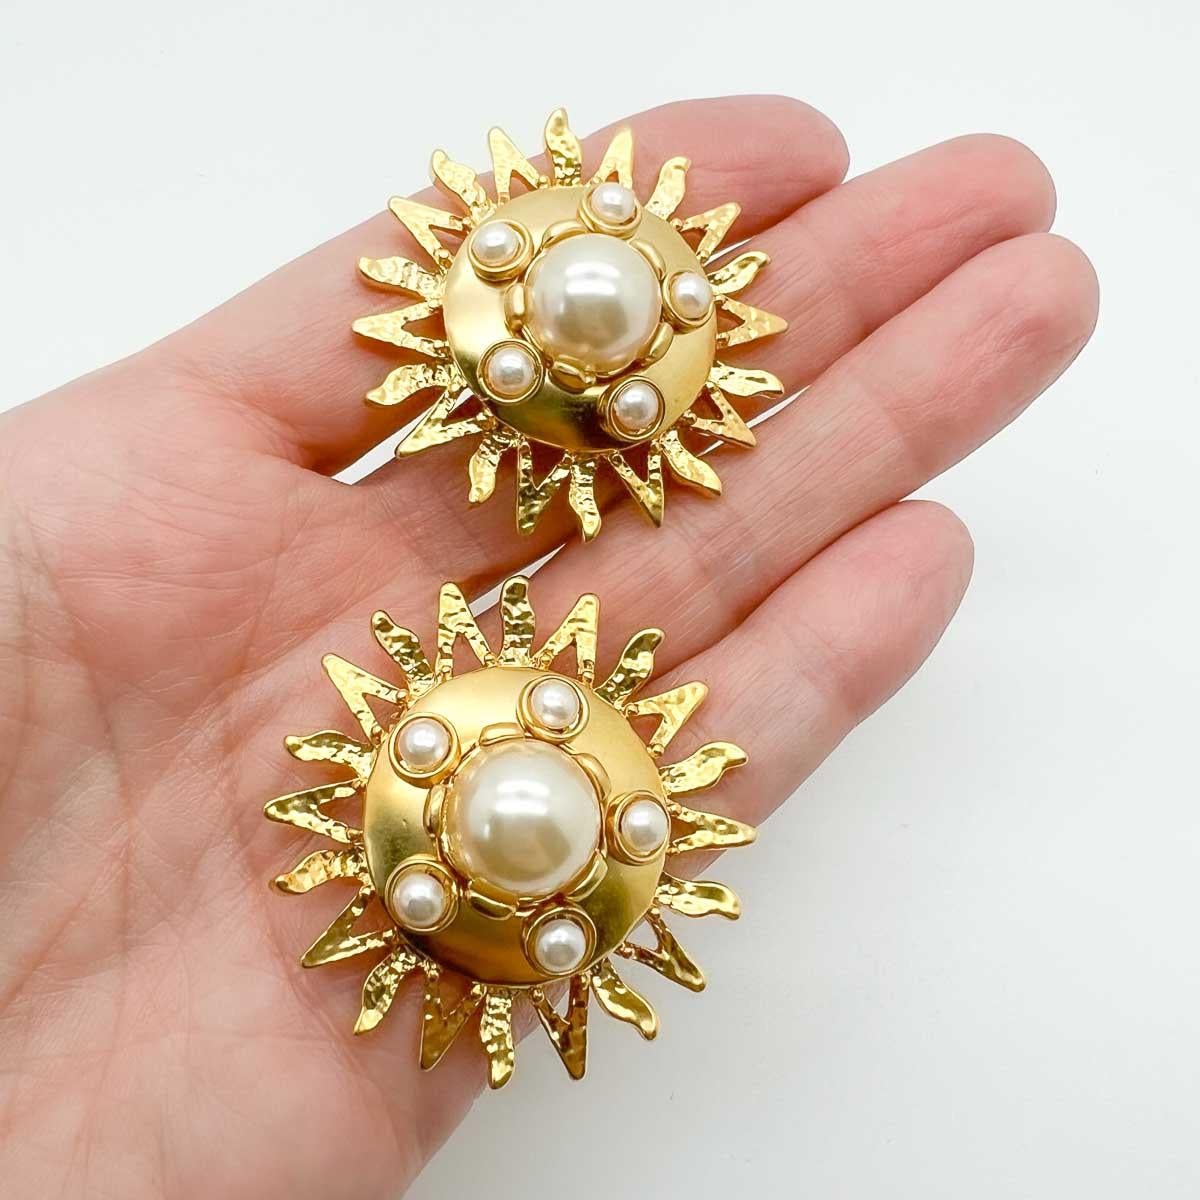 Vintage Statement Pearl Starburst Earrings 1980s In Good Condition For Sale In Wilmslow, GB